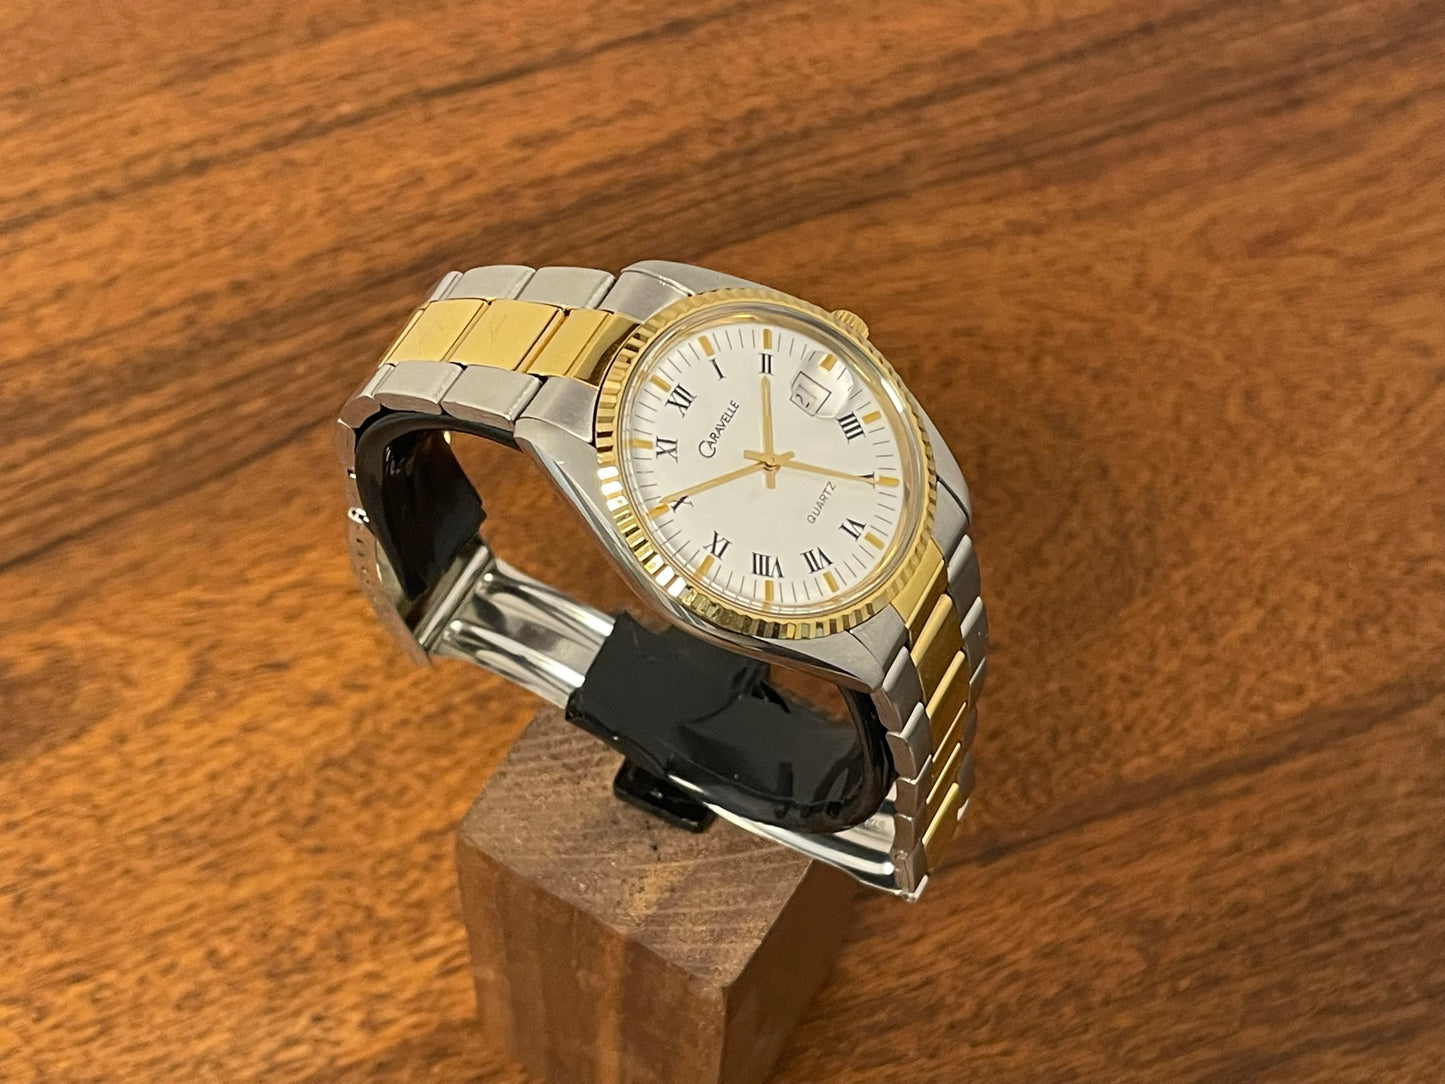 (1980s) Caravelle (manufactured by Bulova) “Datejust” dress watch